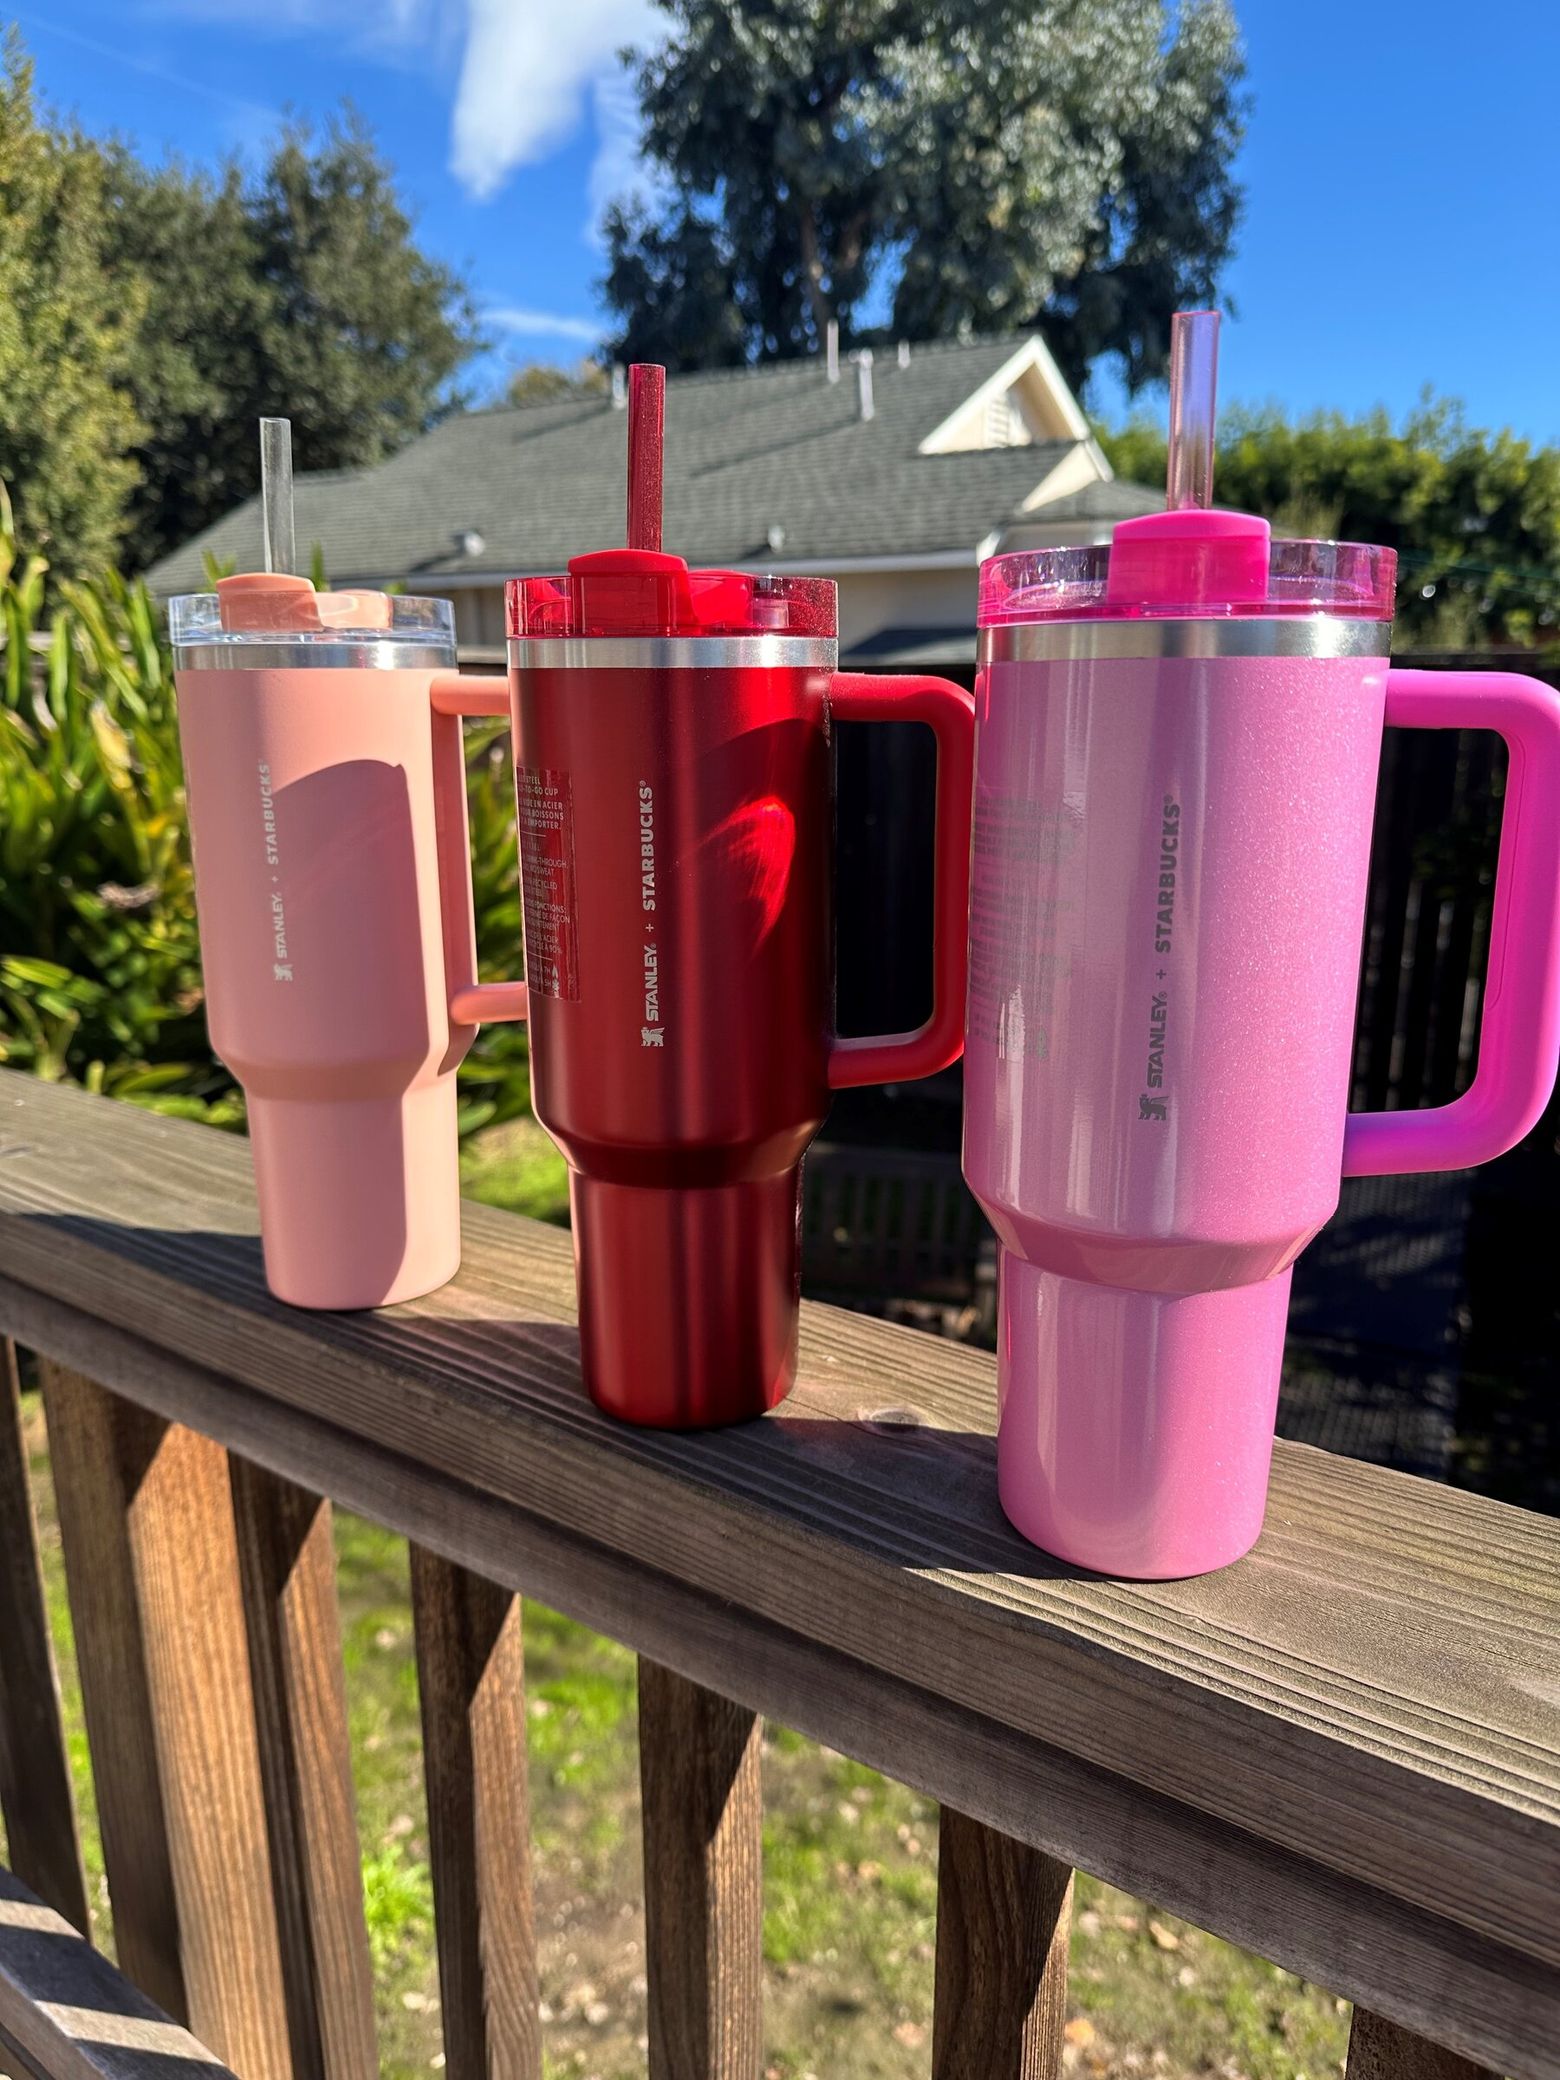 Seattle-based Stanley rides the wave of water bottle, tumbler addiction